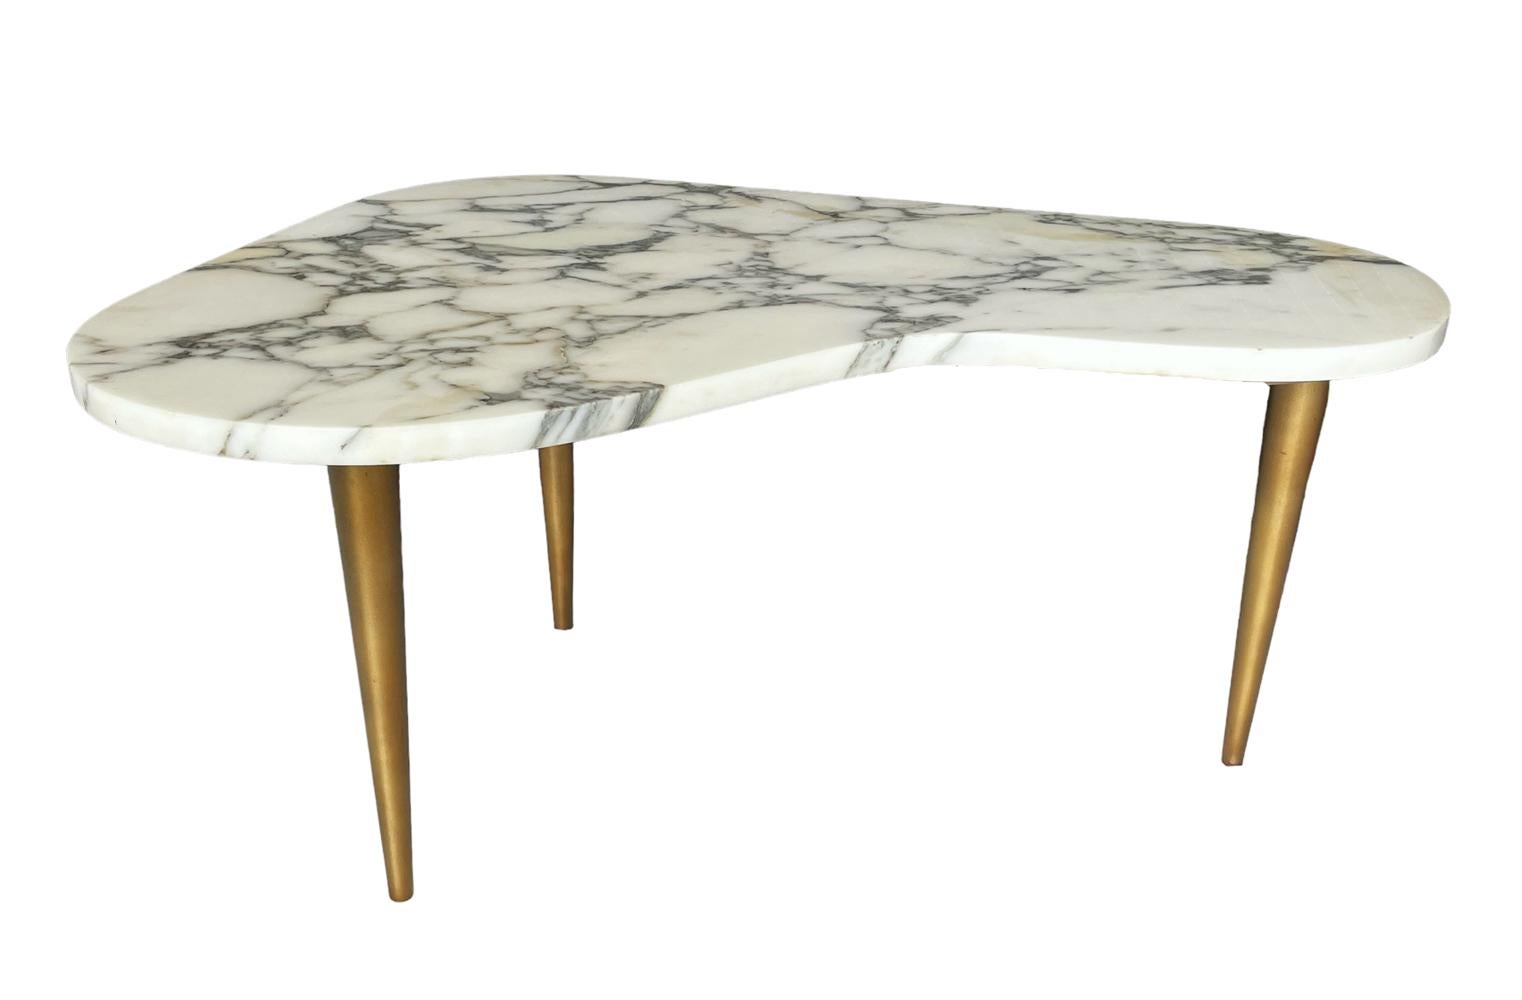 A fine vintage side table from Italy circa 1960's. It features a kidney shape Arrabesco marble top with gold lacquered metal legs. Very good condition without issues. 